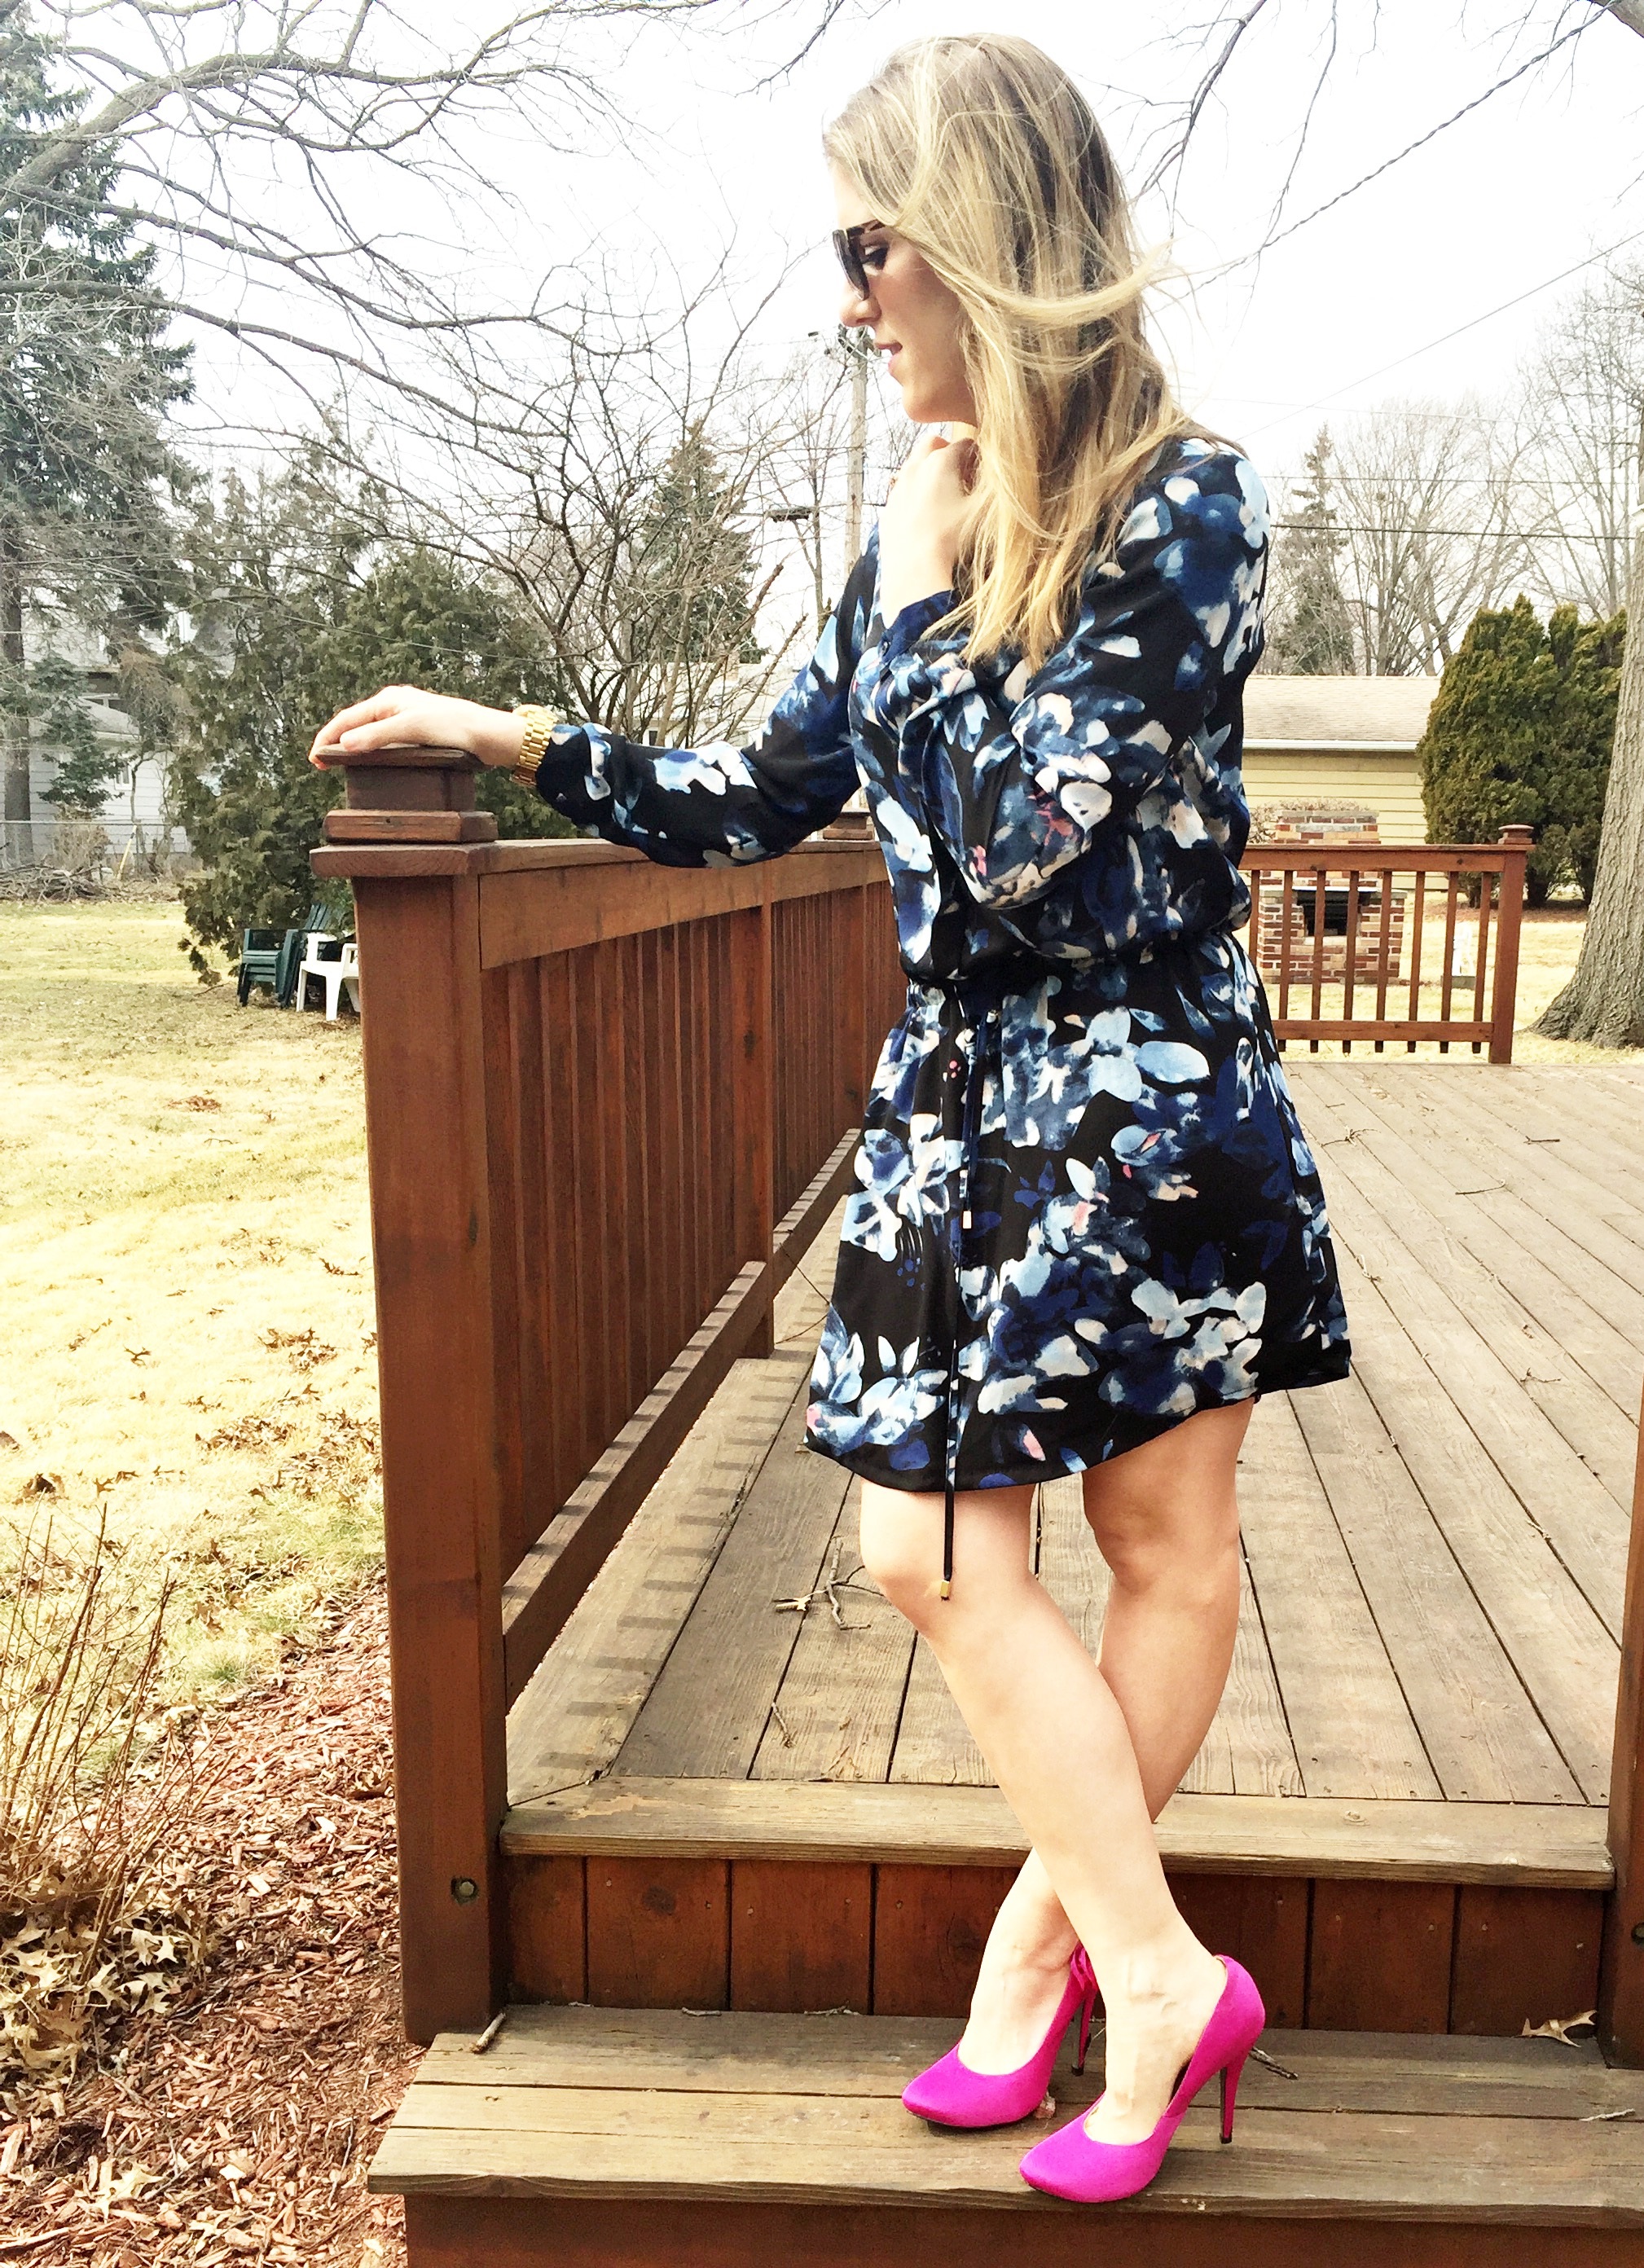 Transitioning fashion from winter to spring